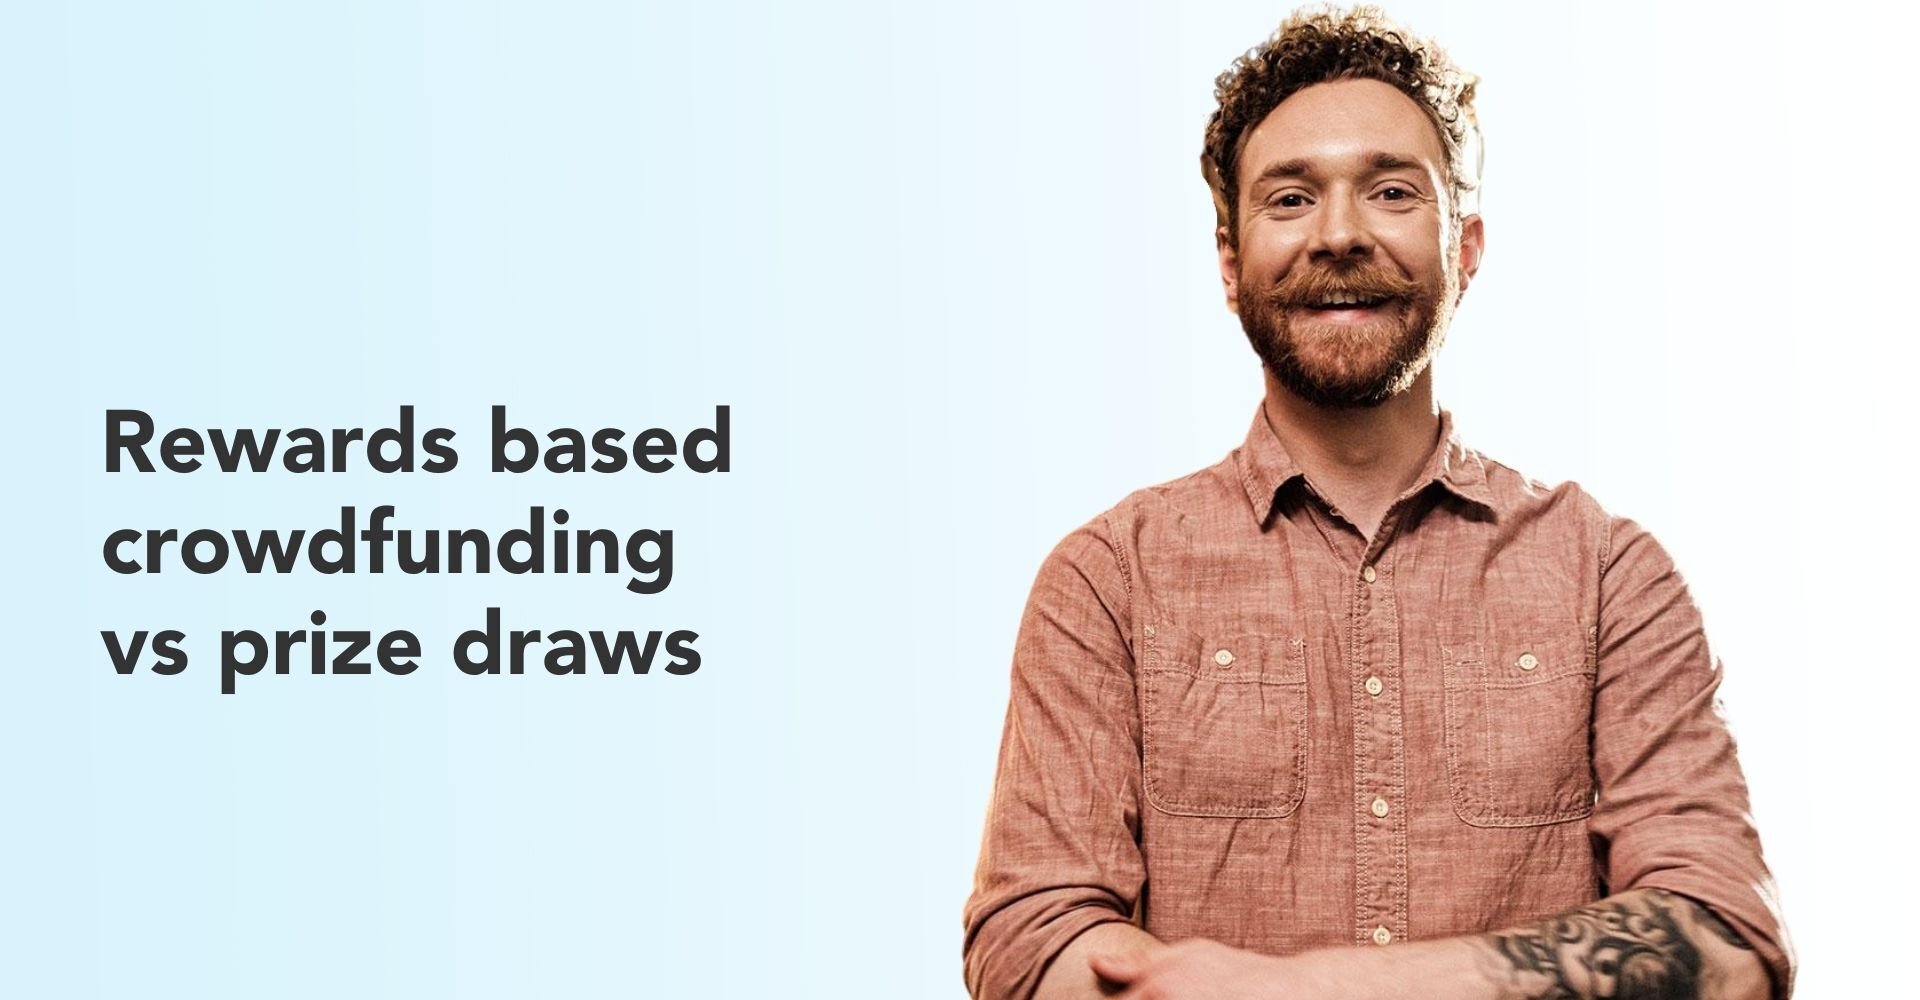 What’s the difference between rewards based crowdfunding and a prize draw?